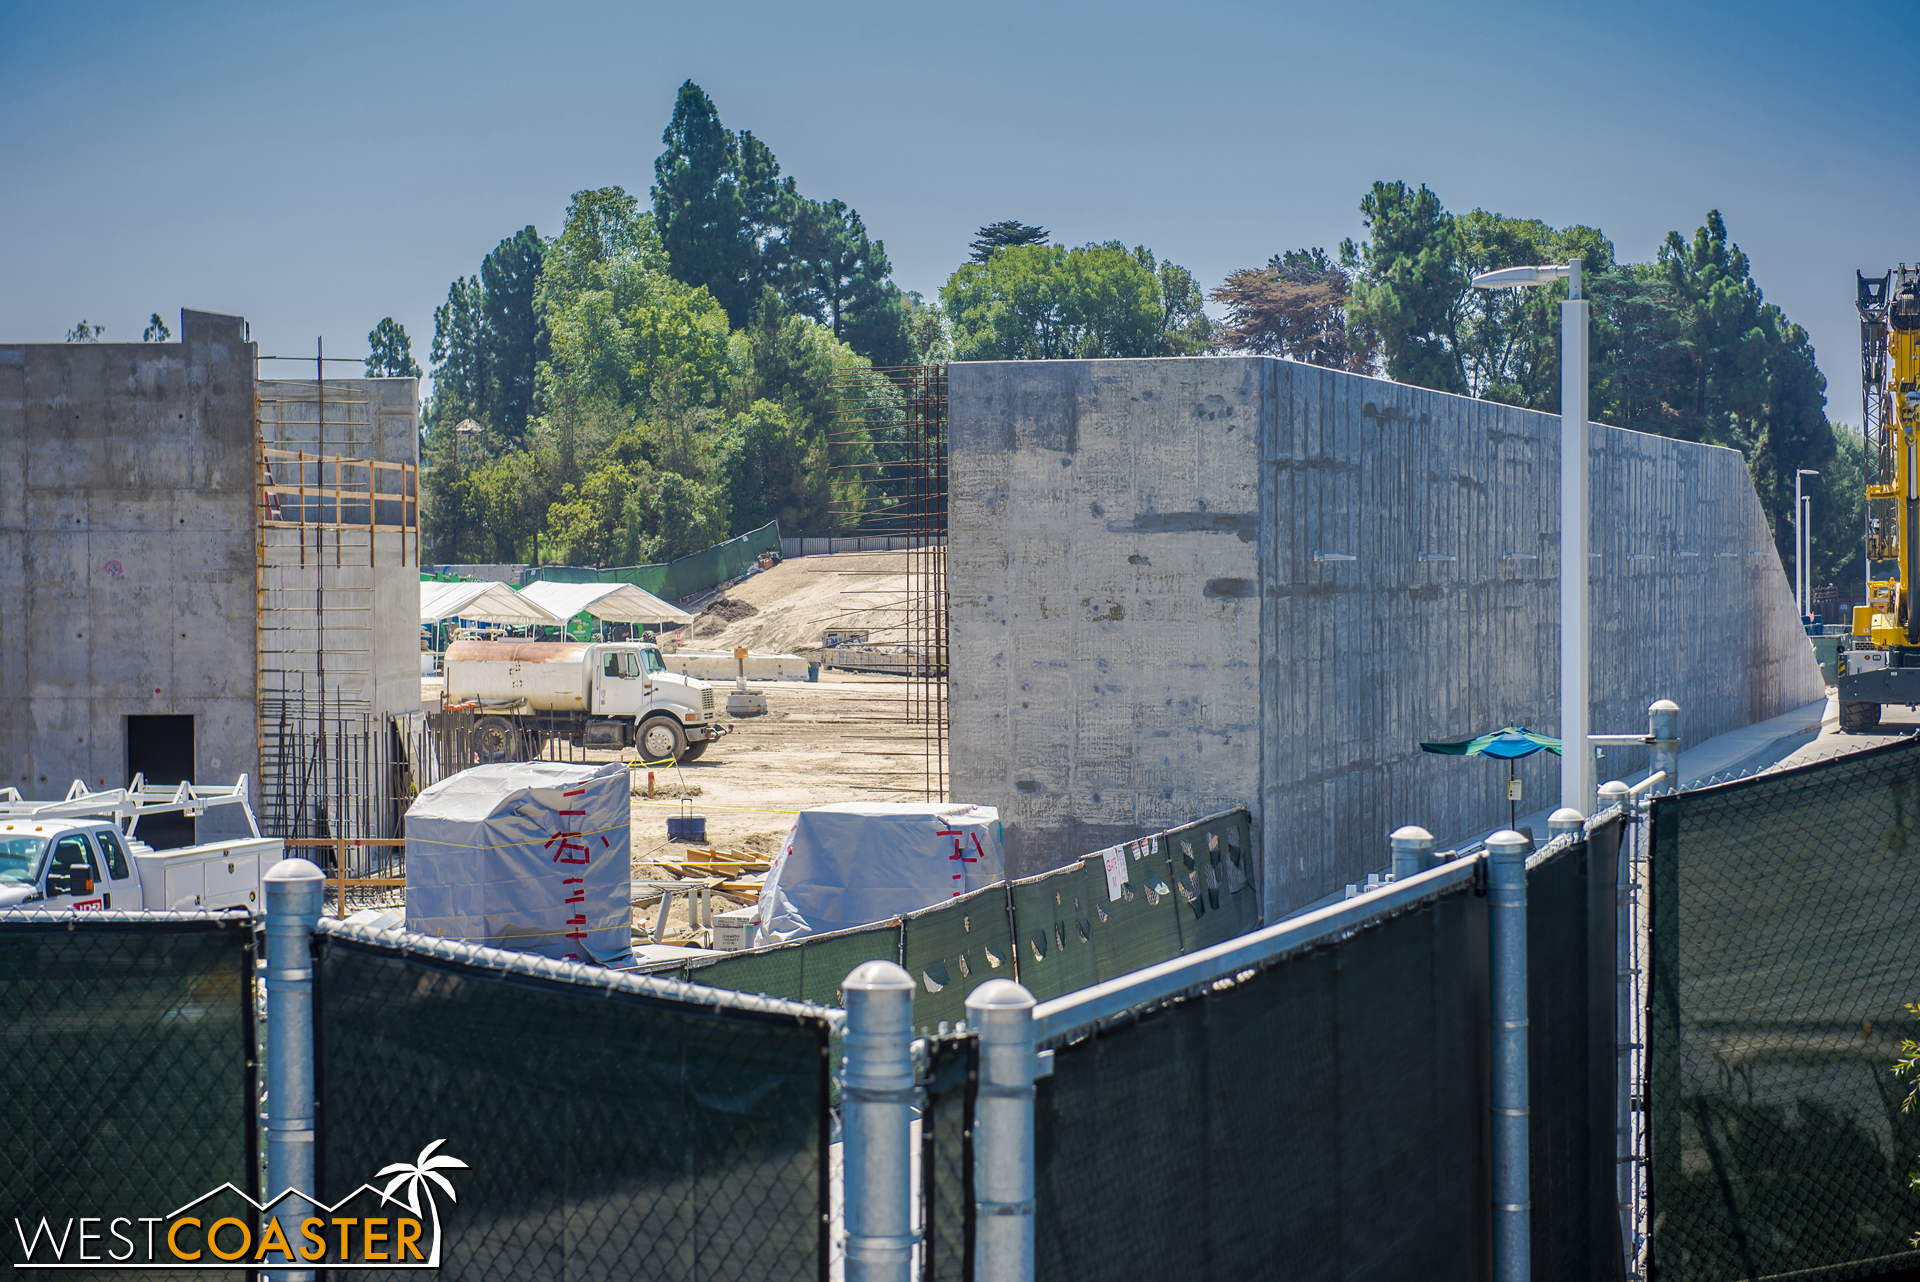  They still haven't closed off this wall, but the rebar is there and ready for it! 